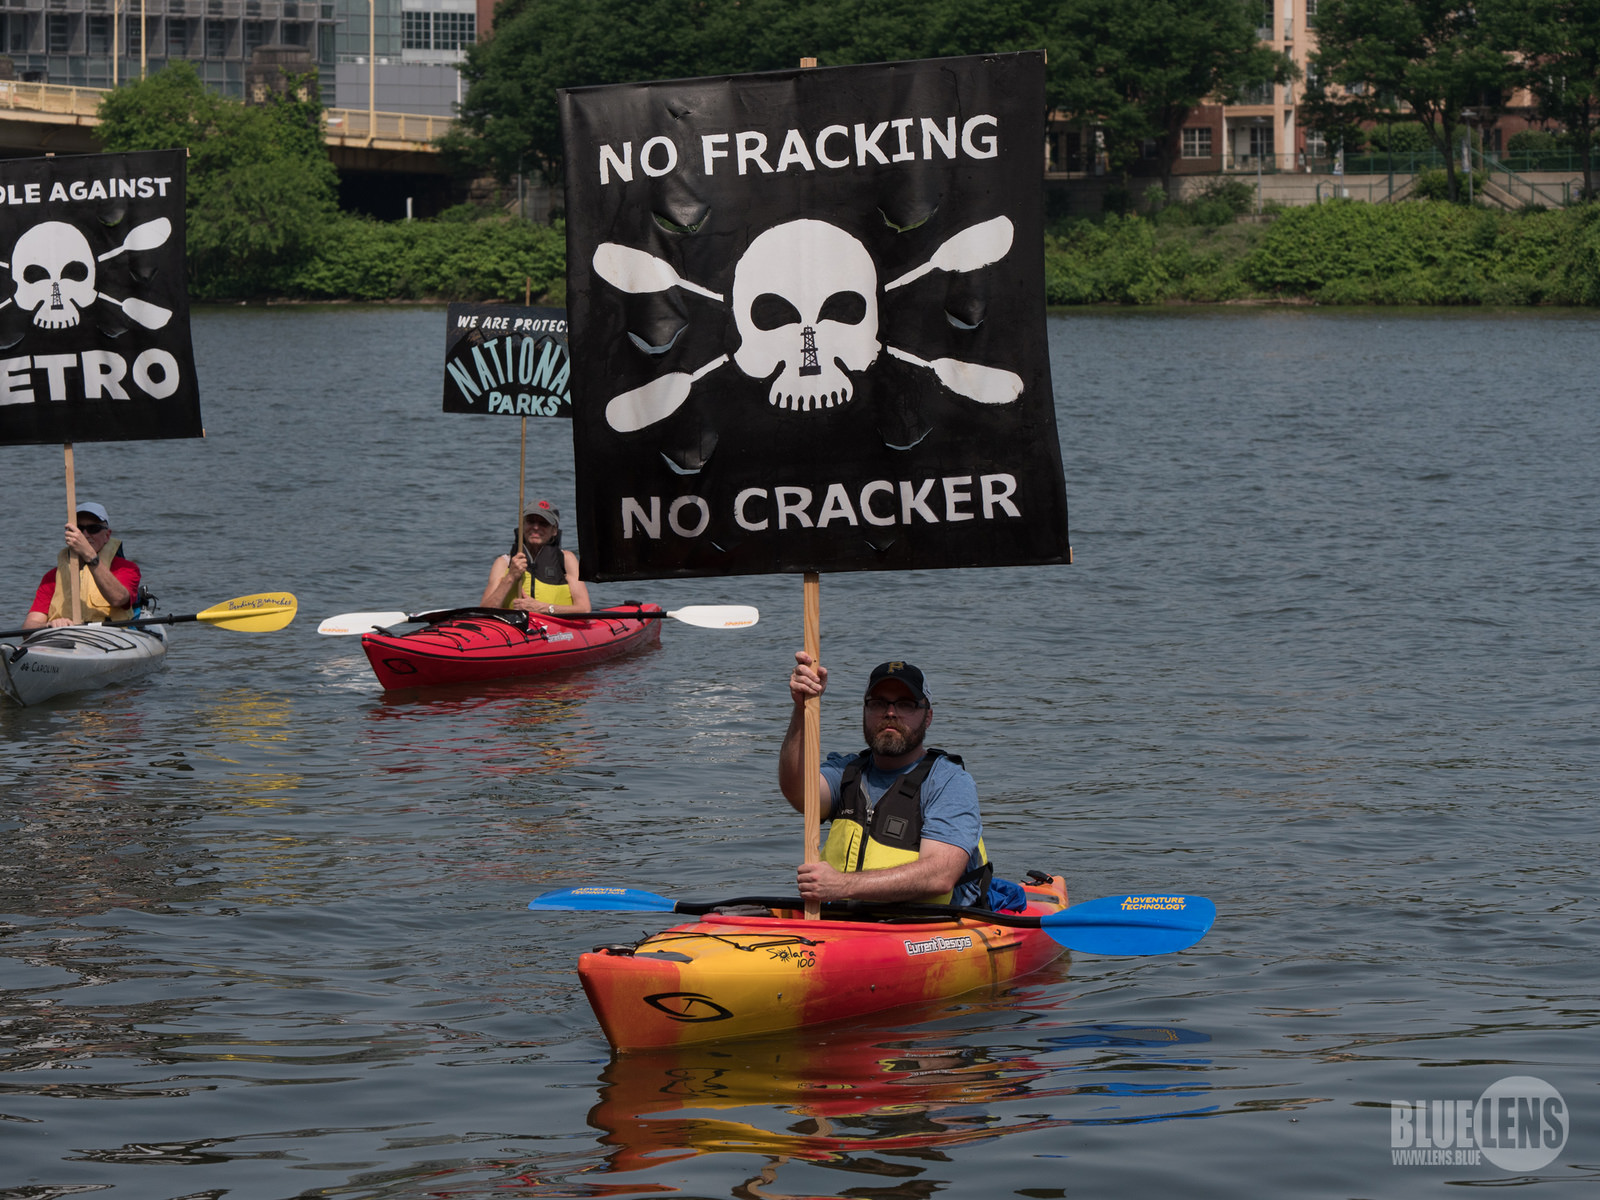 Protesers in kayaks with signs against fracking and cracker plants